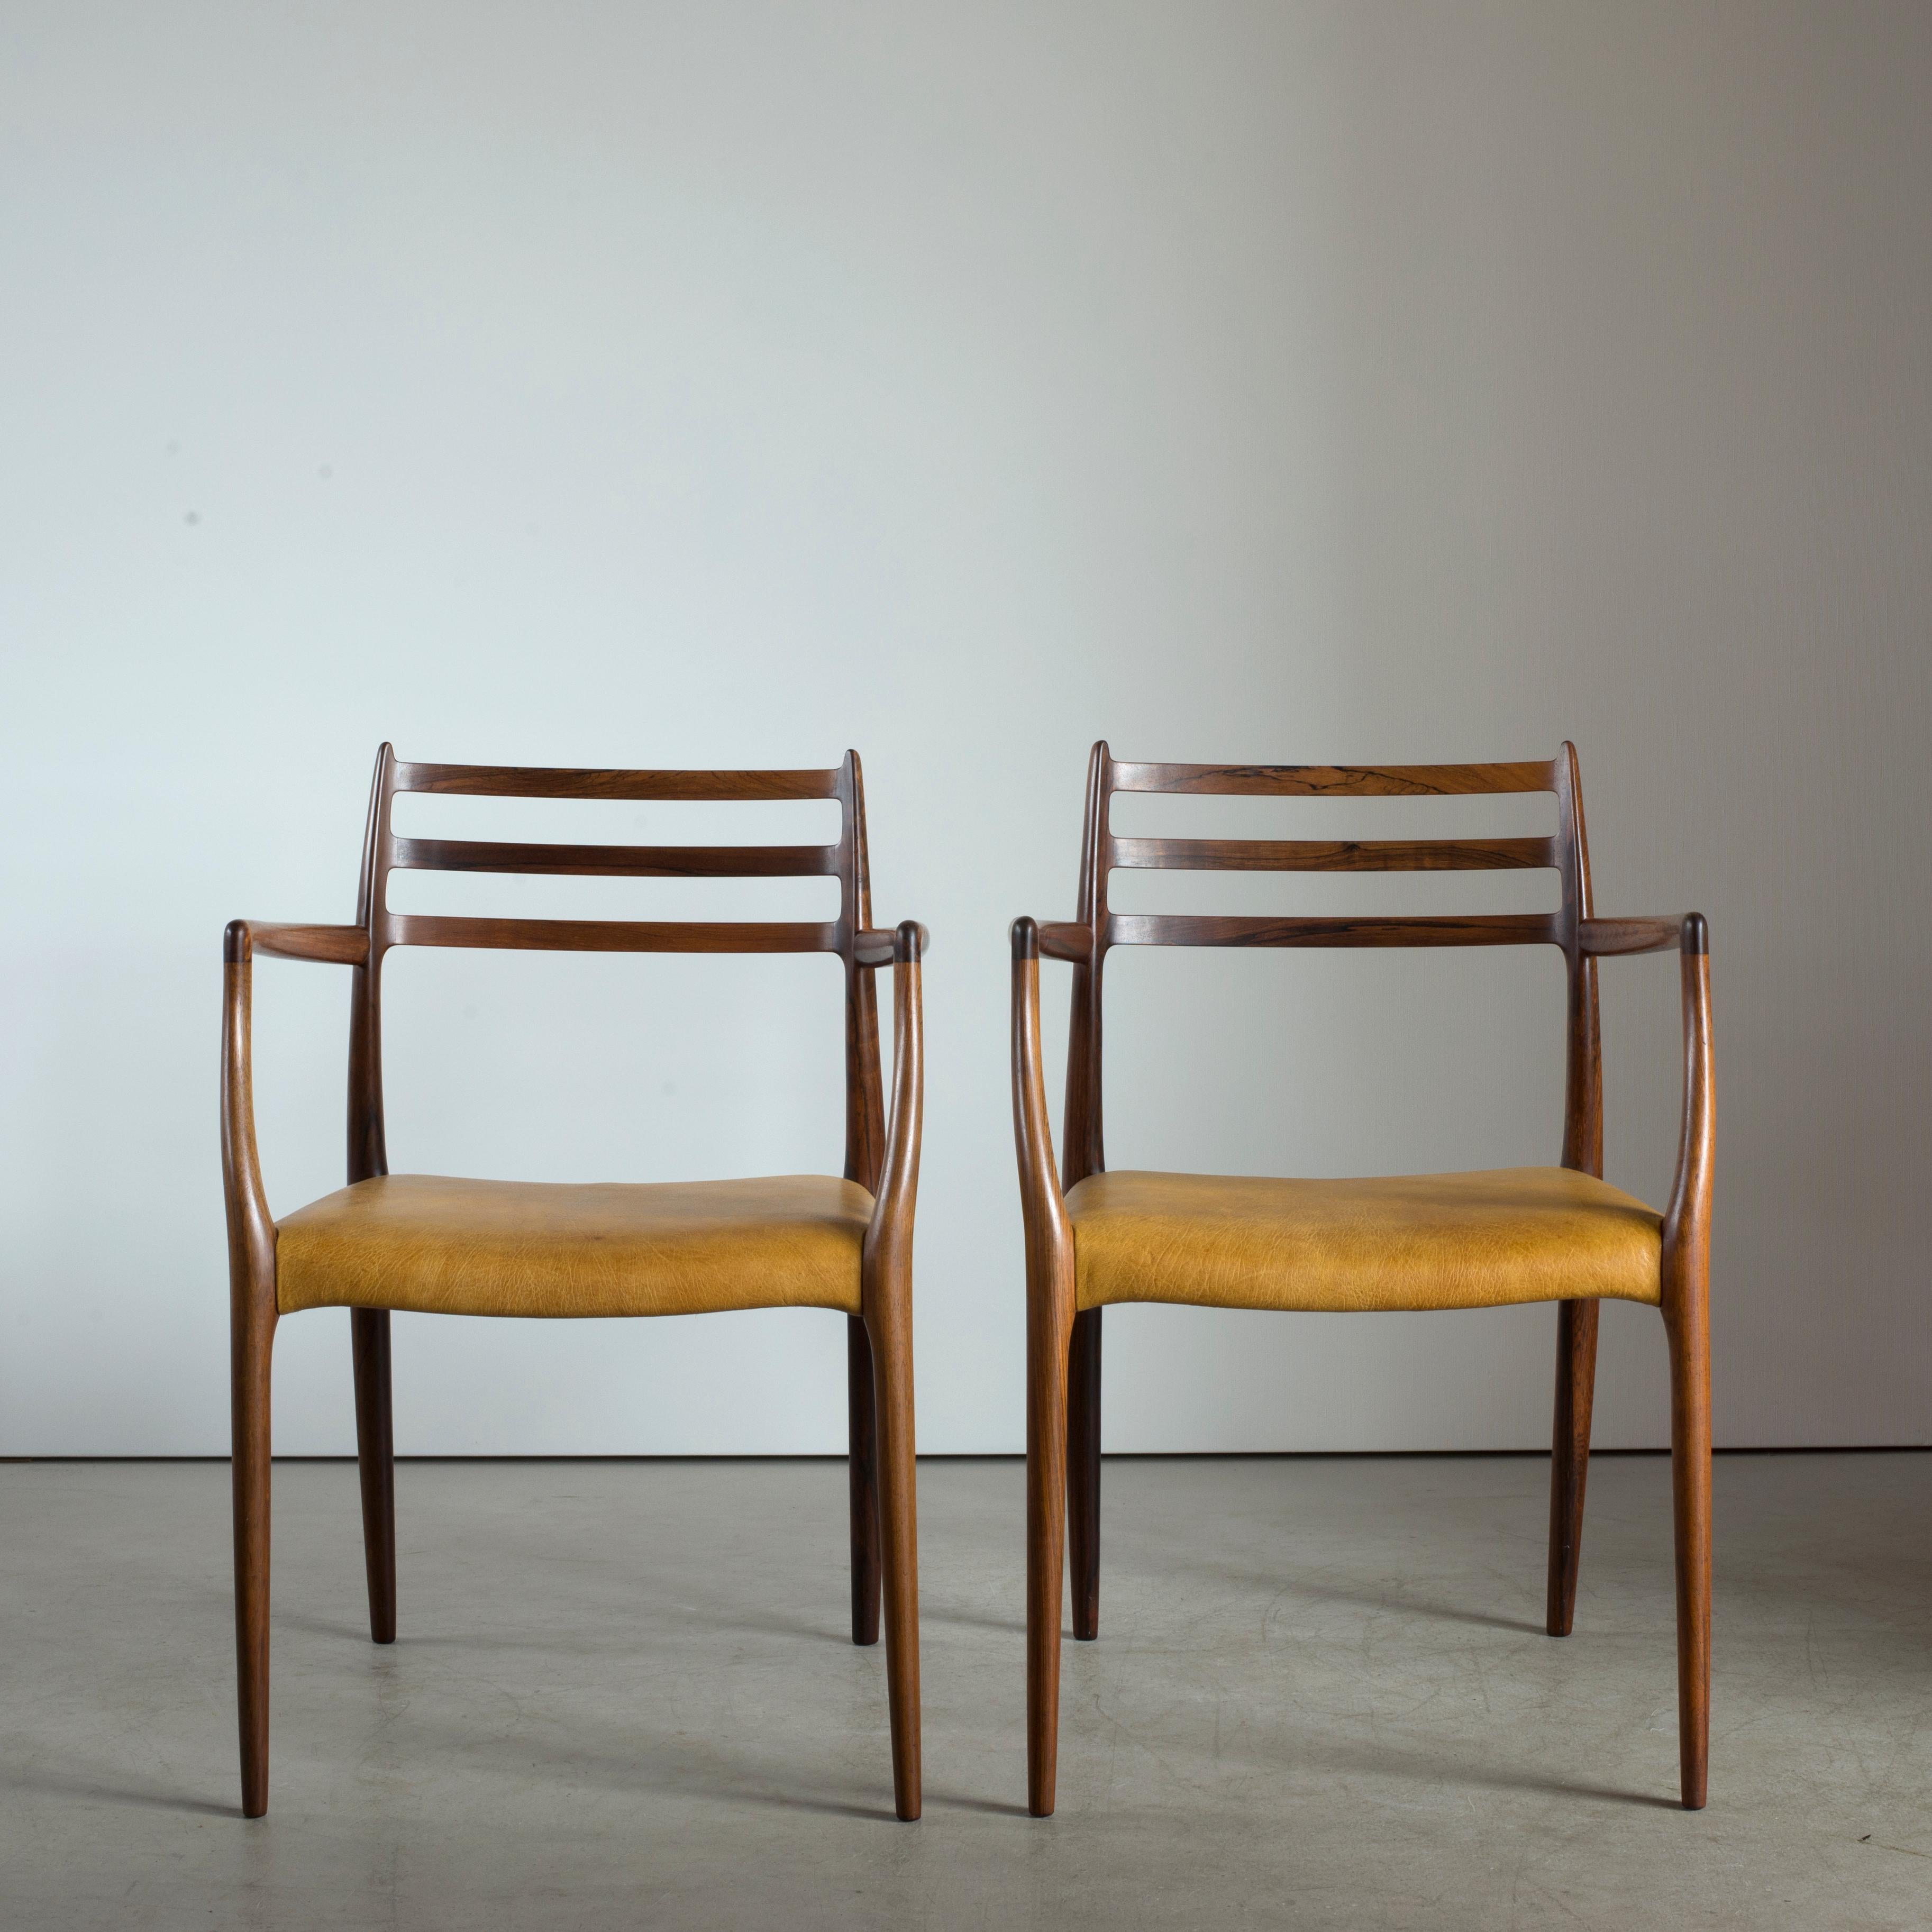 A pair of Brazilian rosewood armchairs, upholstered in seats with leather. Executed by J. L. Møller, Denmark.